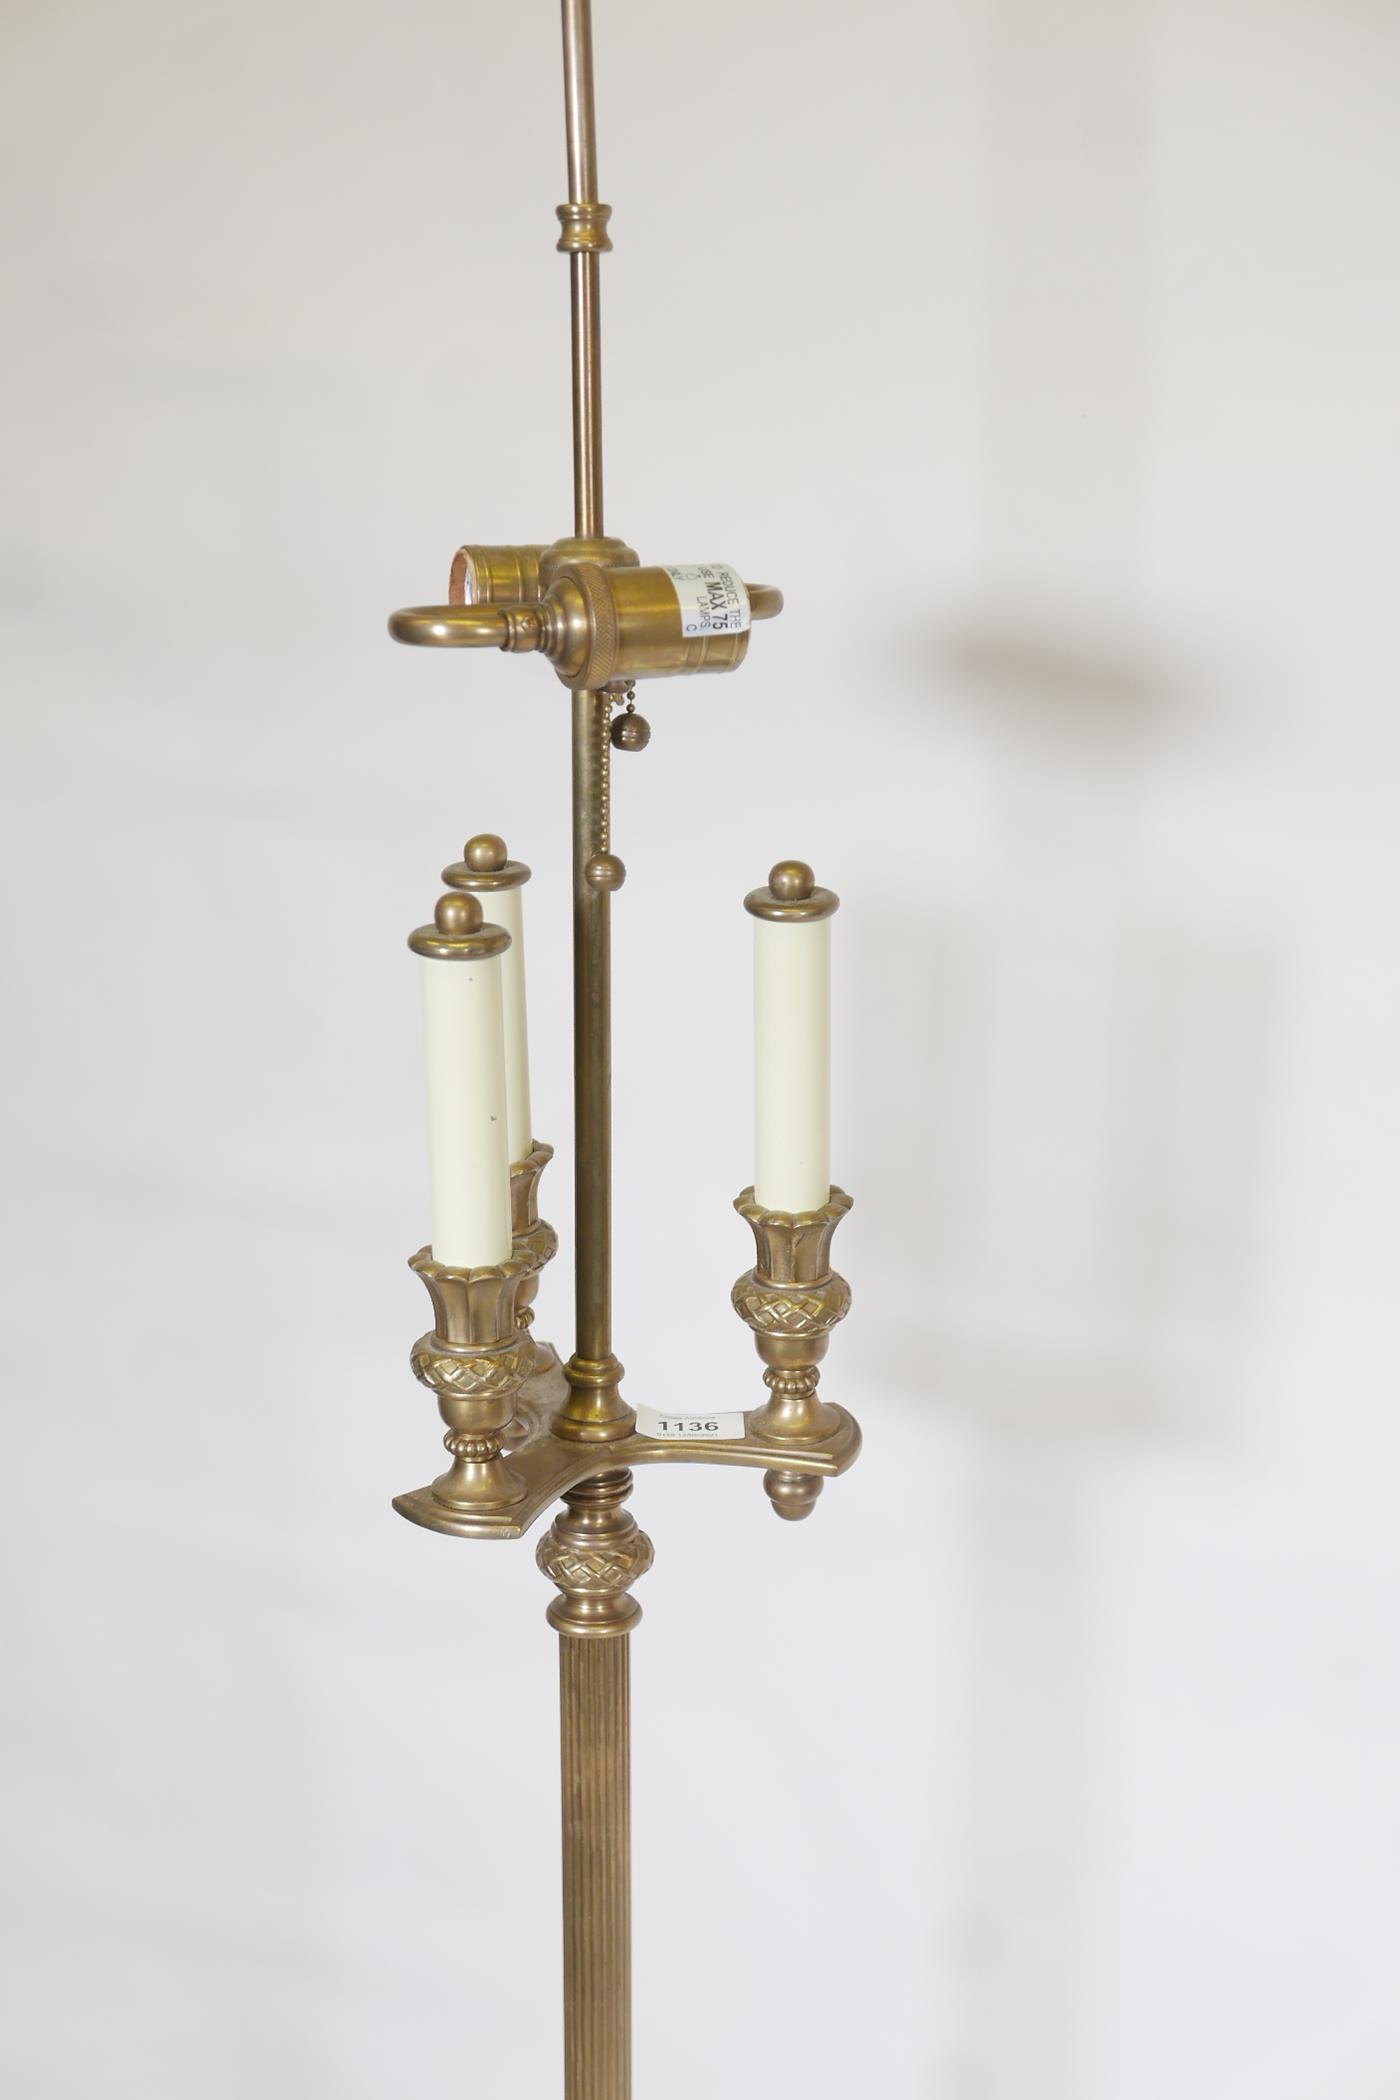 A brass three branch, two light standard lamp, with fluted column and triform base, 62" high - Image 2 of 2